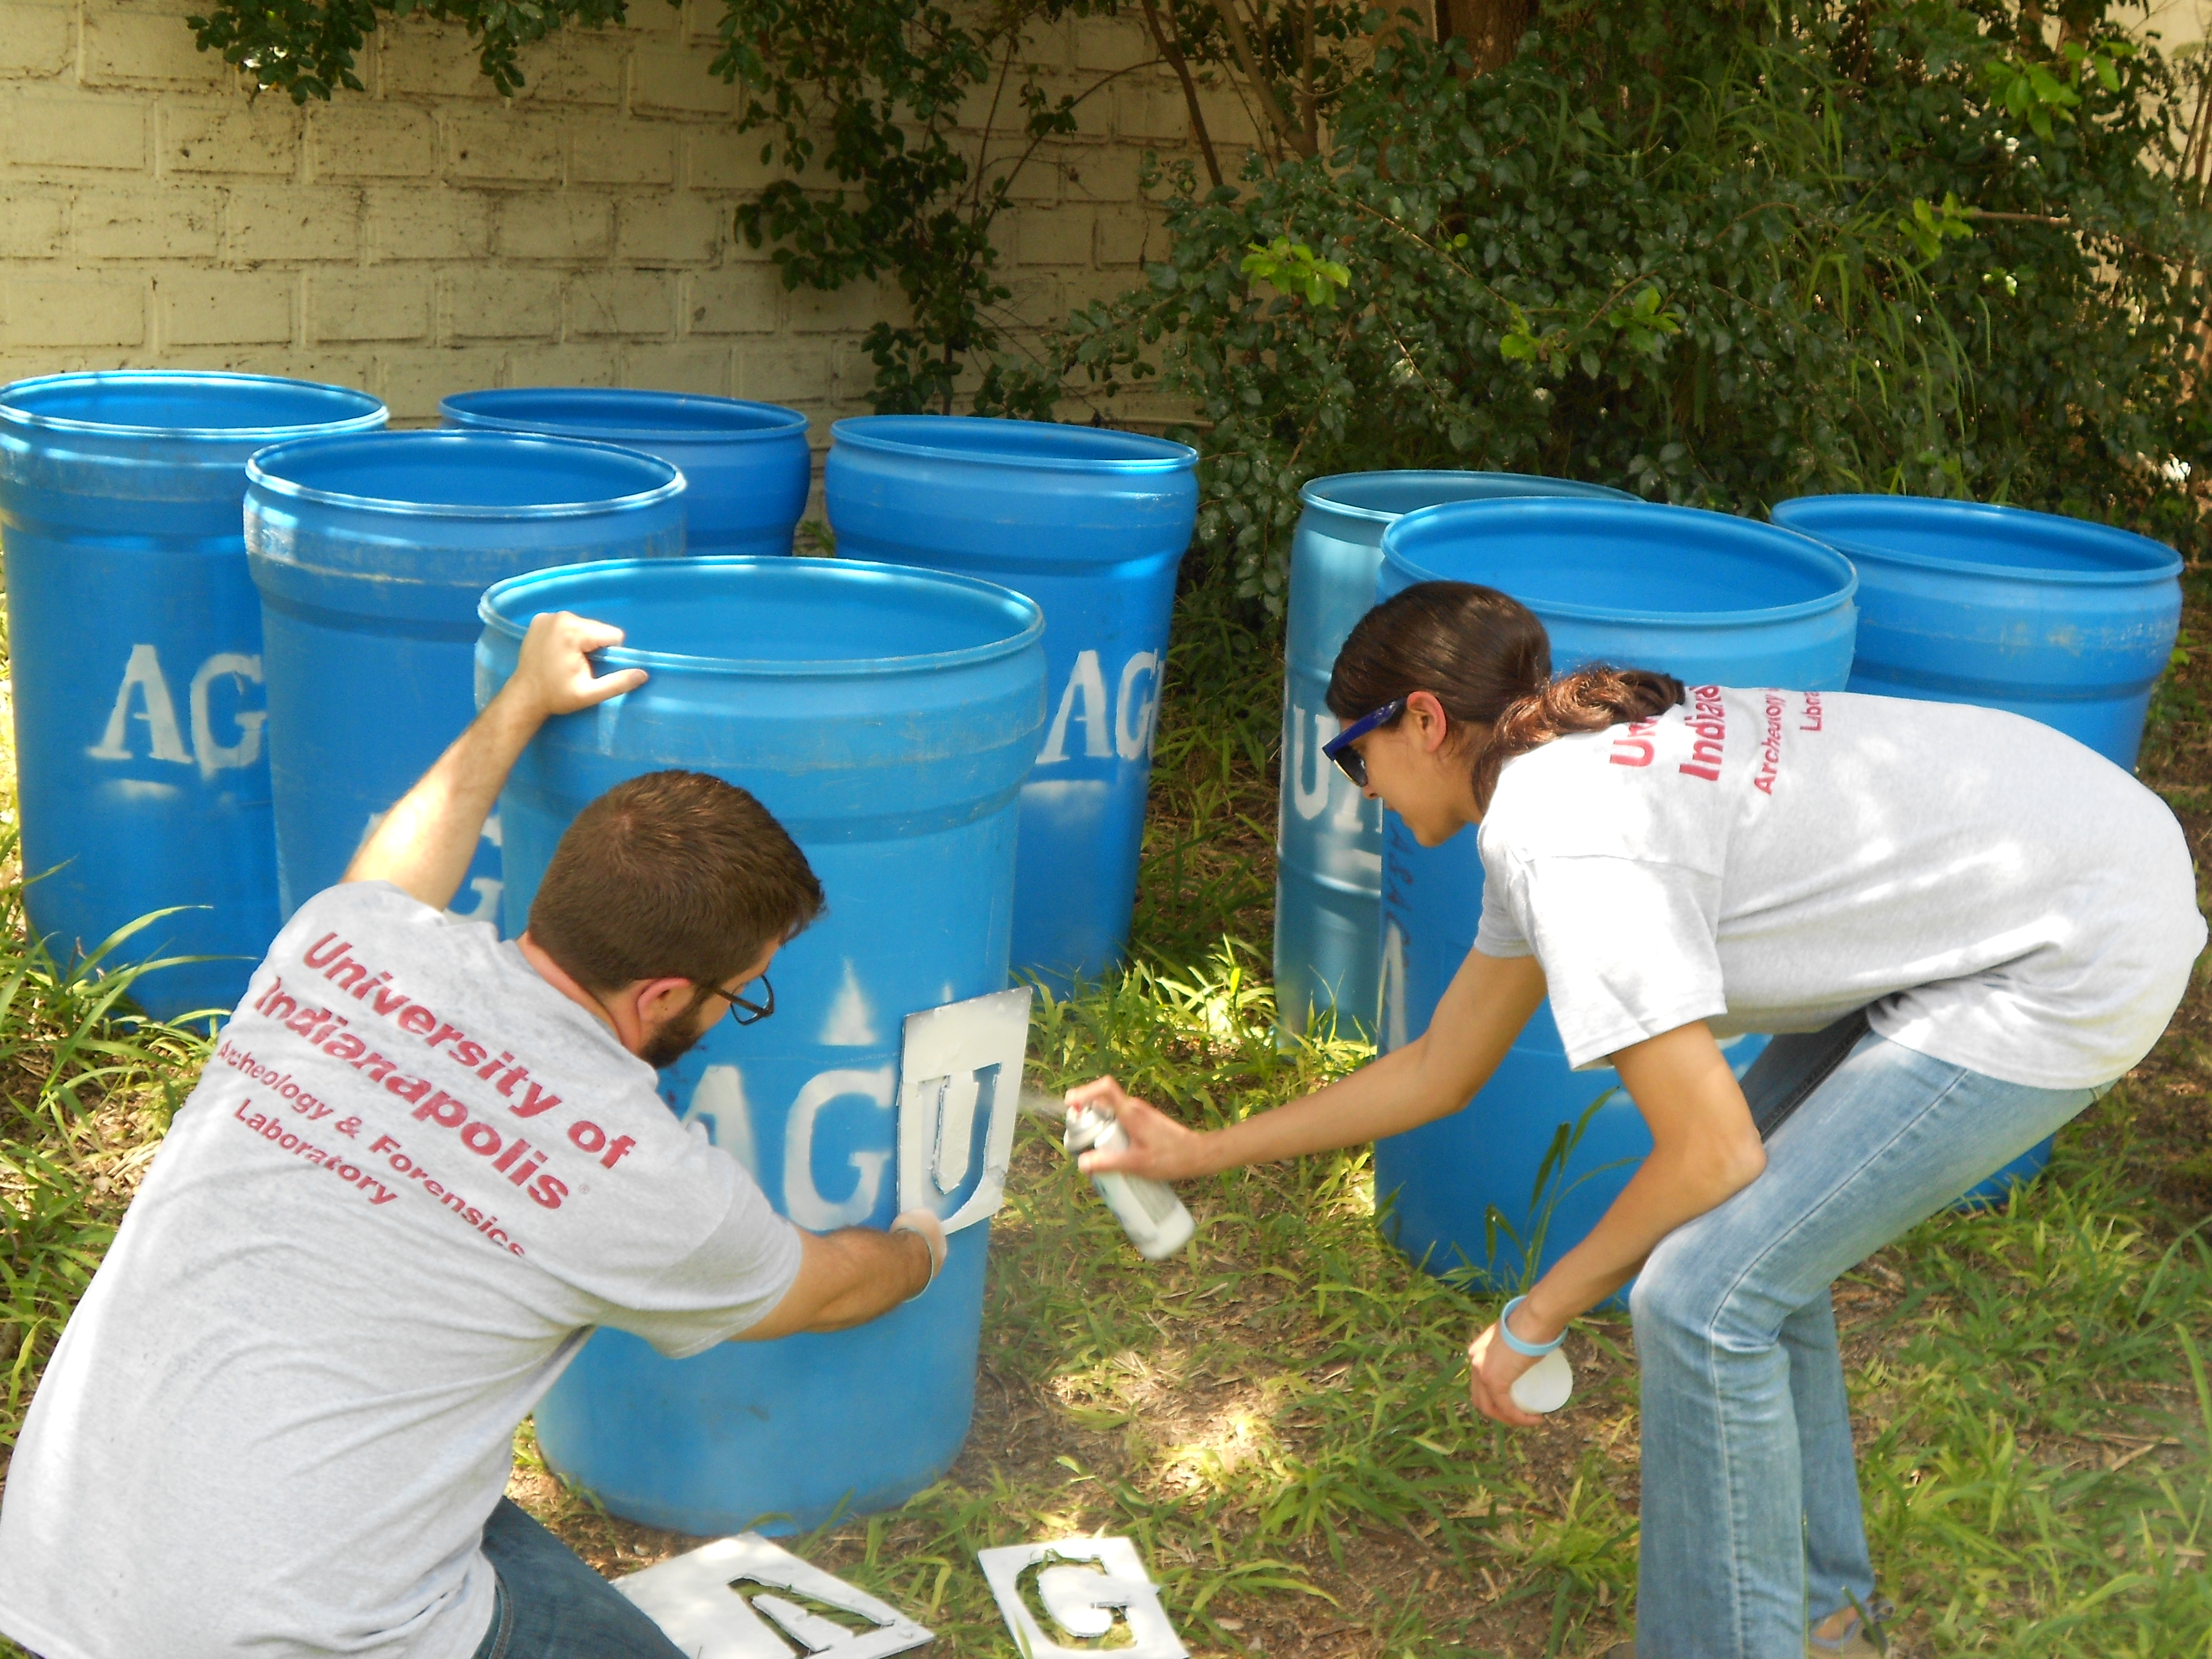 Team members spray painting a "U" with a stencil on a water station barrel outside with multiple barrels in the background